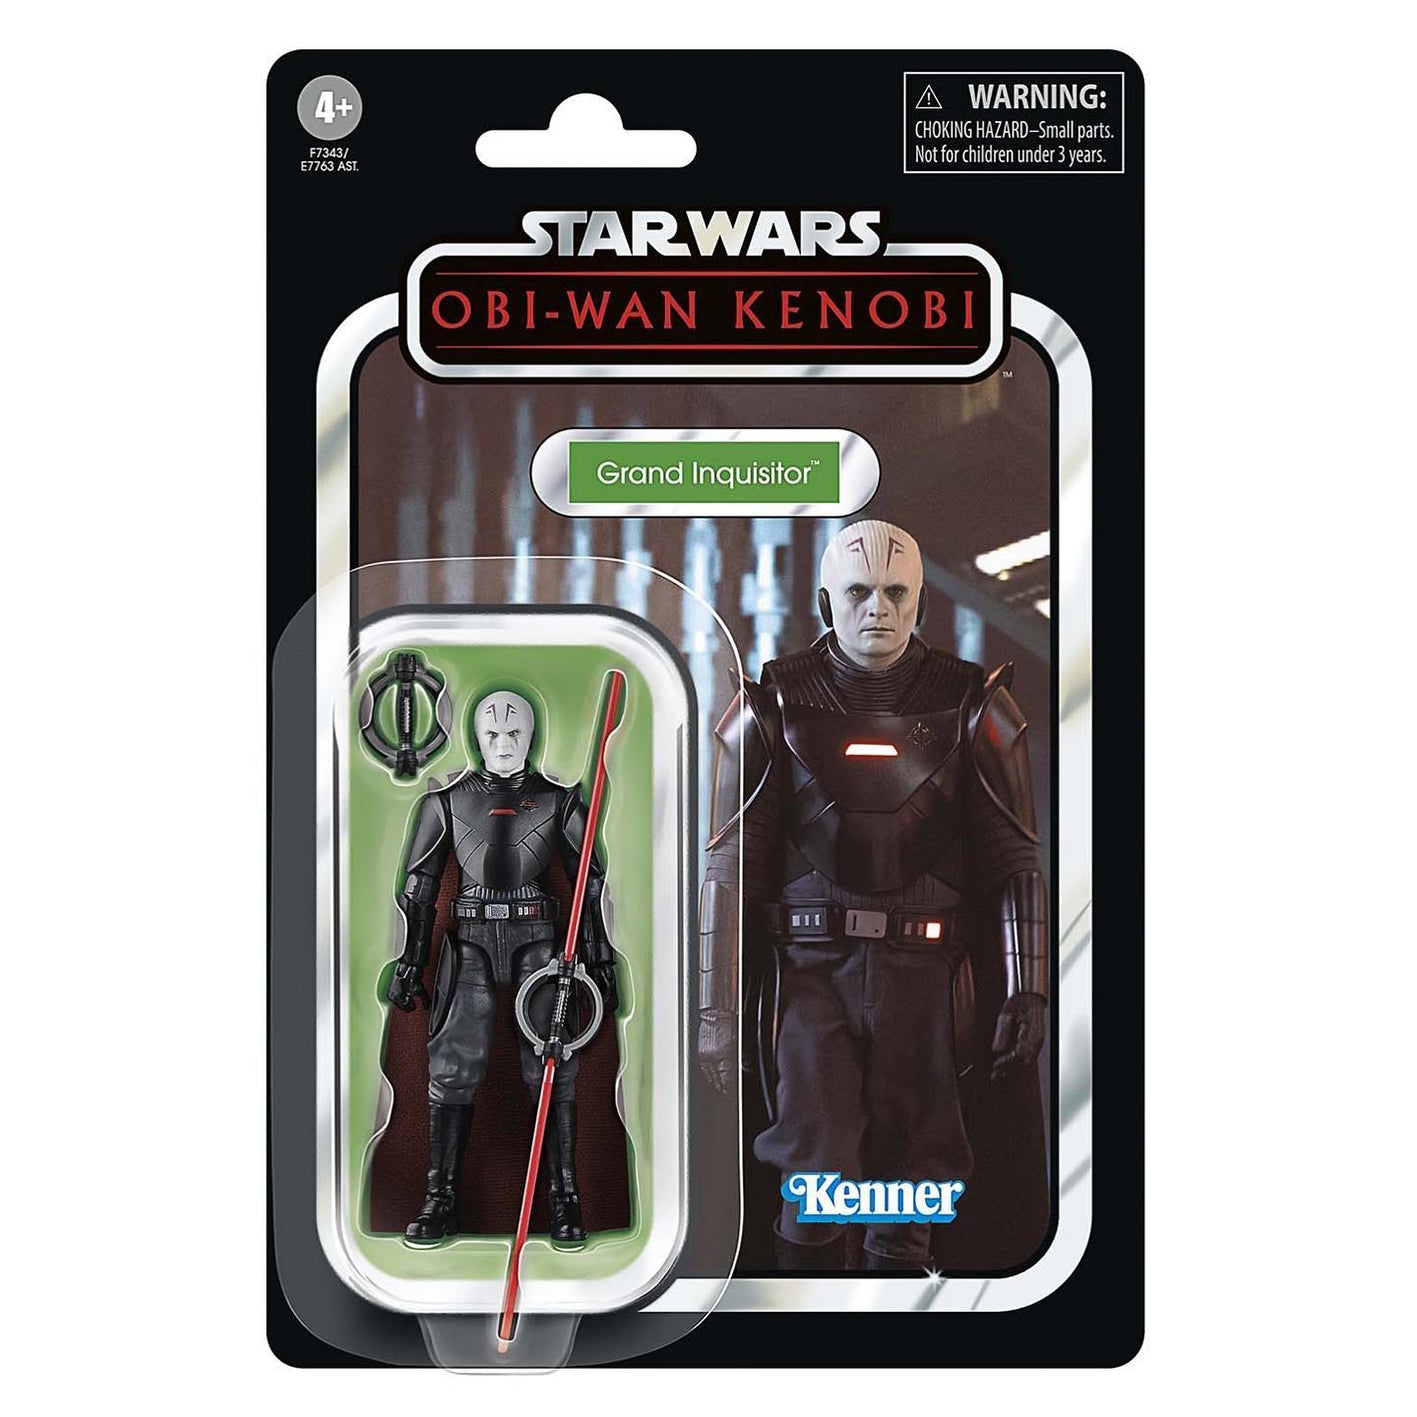 Grand Inquisitor, Star Wars The Vintage Collection